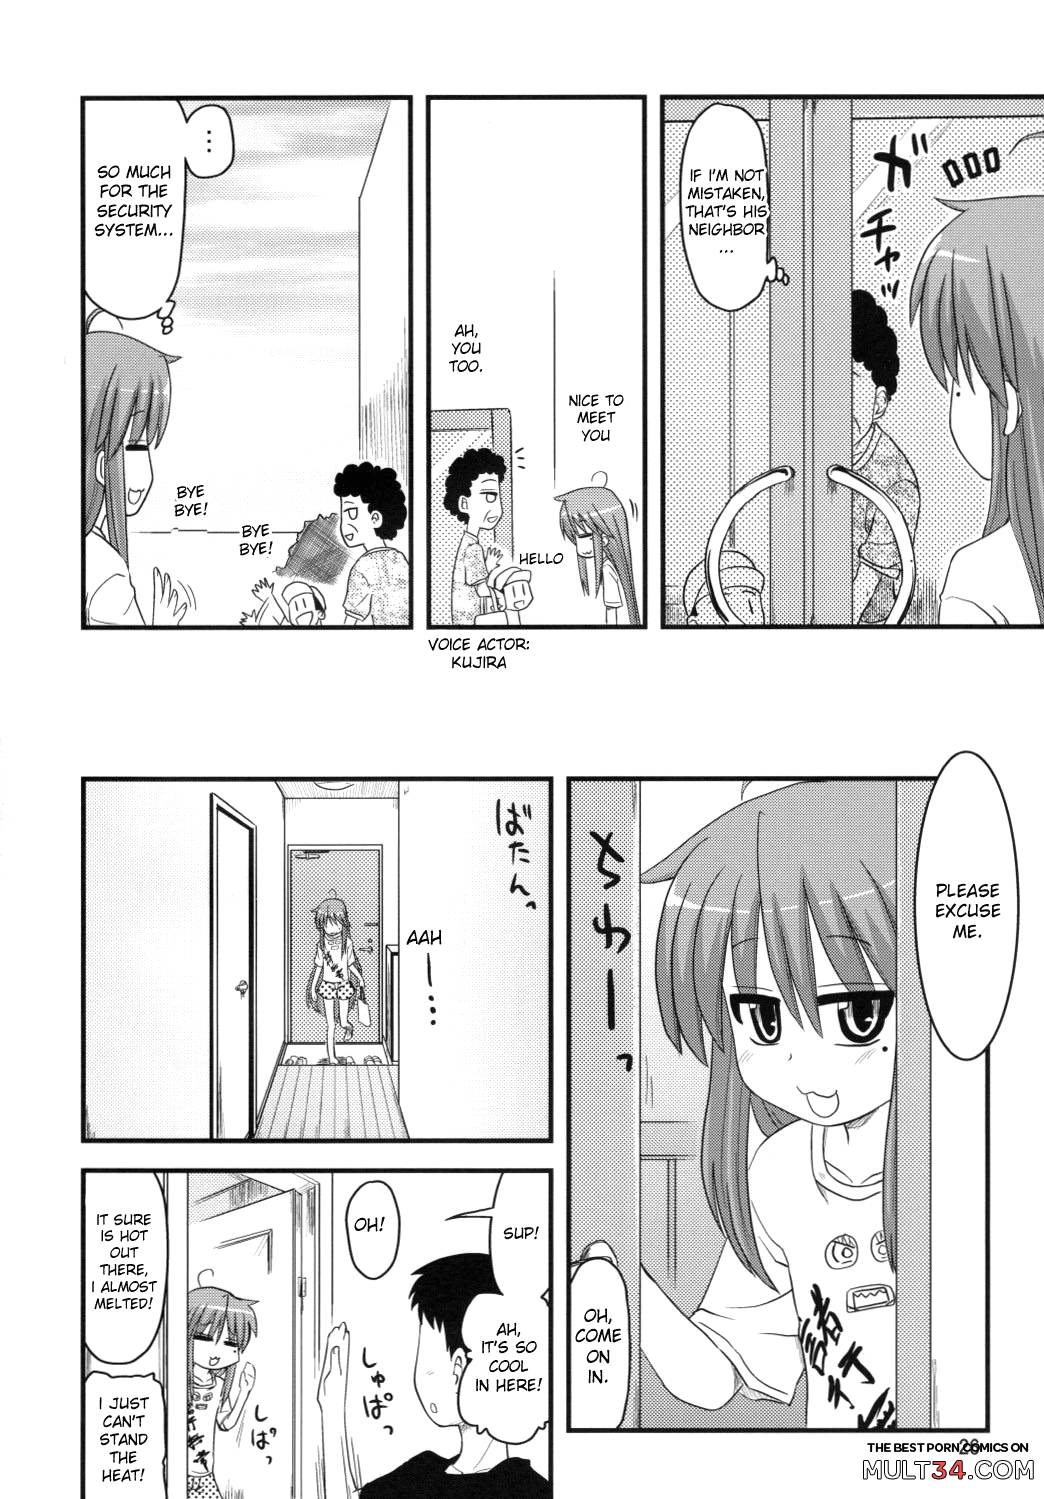 Konata and Oh-zu 4 people each and every one + 1 page 22